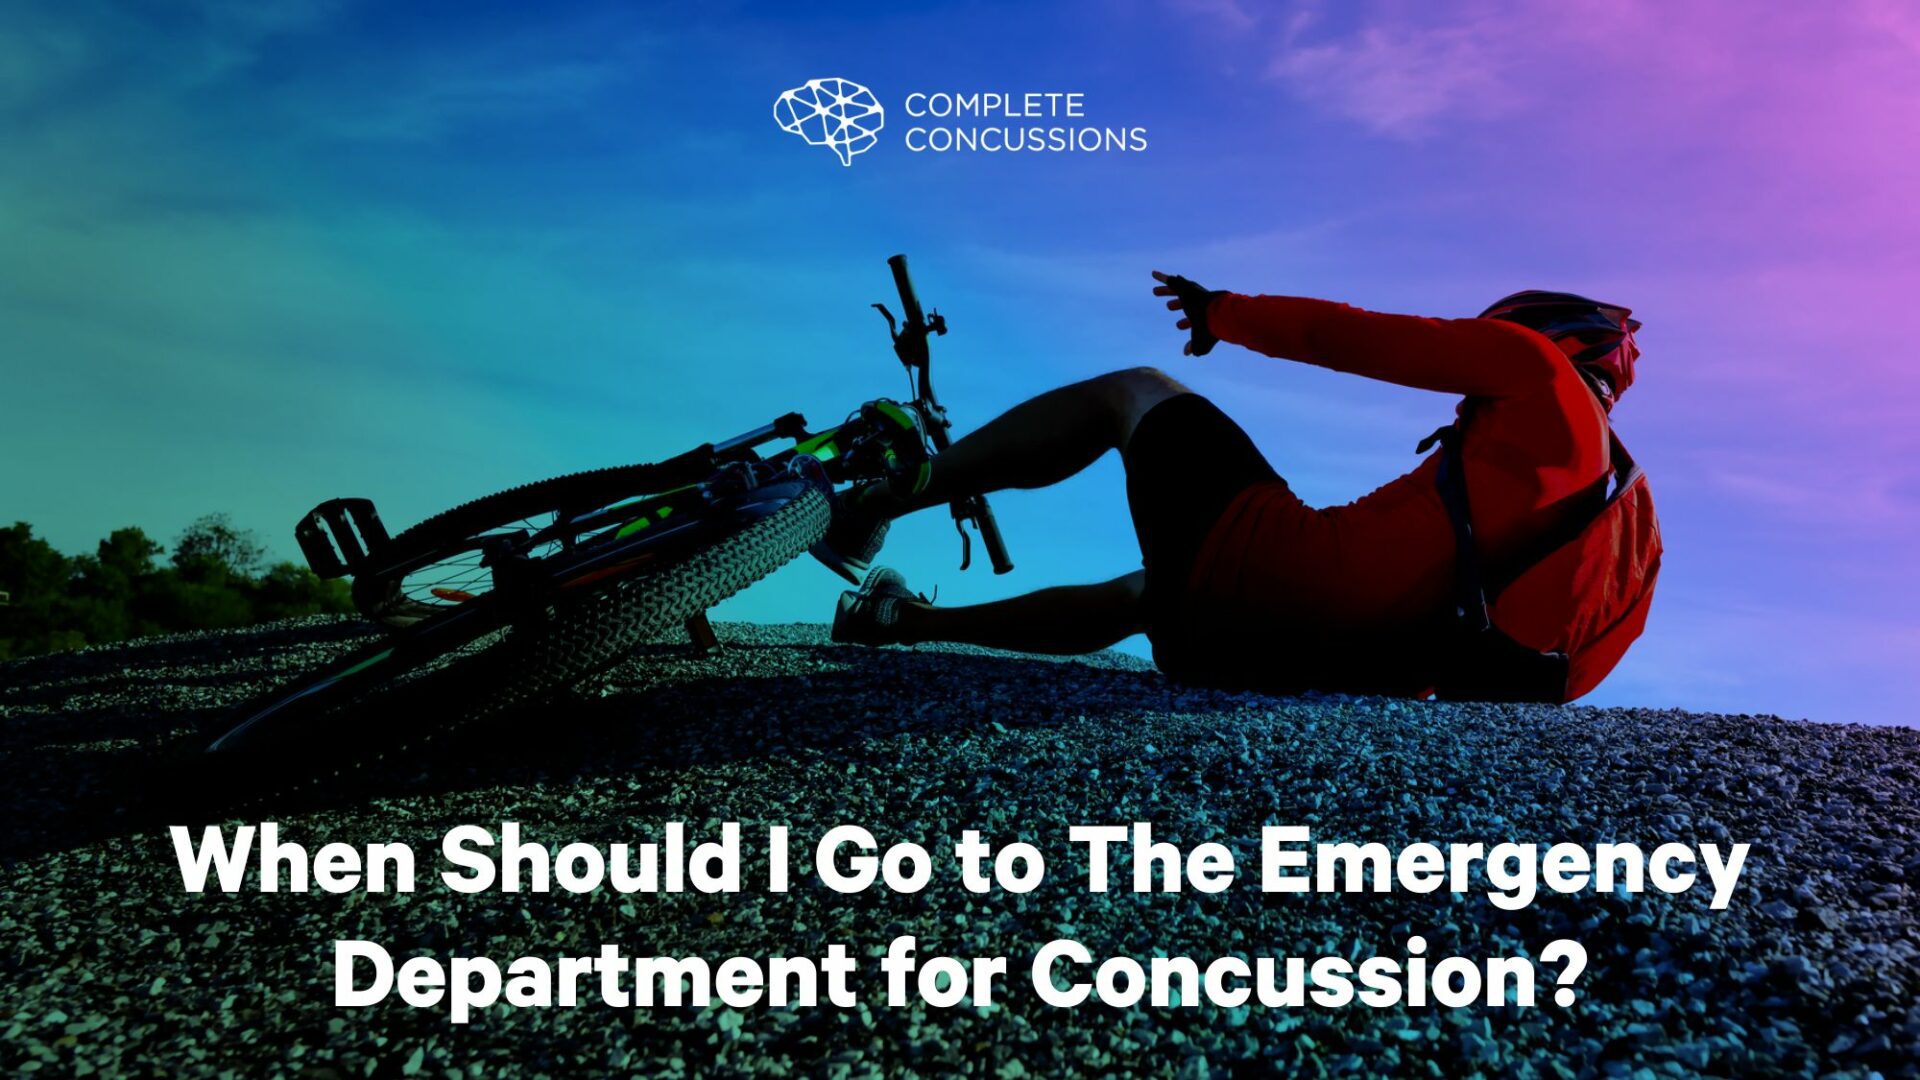 When Should I Go to The Emergency Department for Concussion?